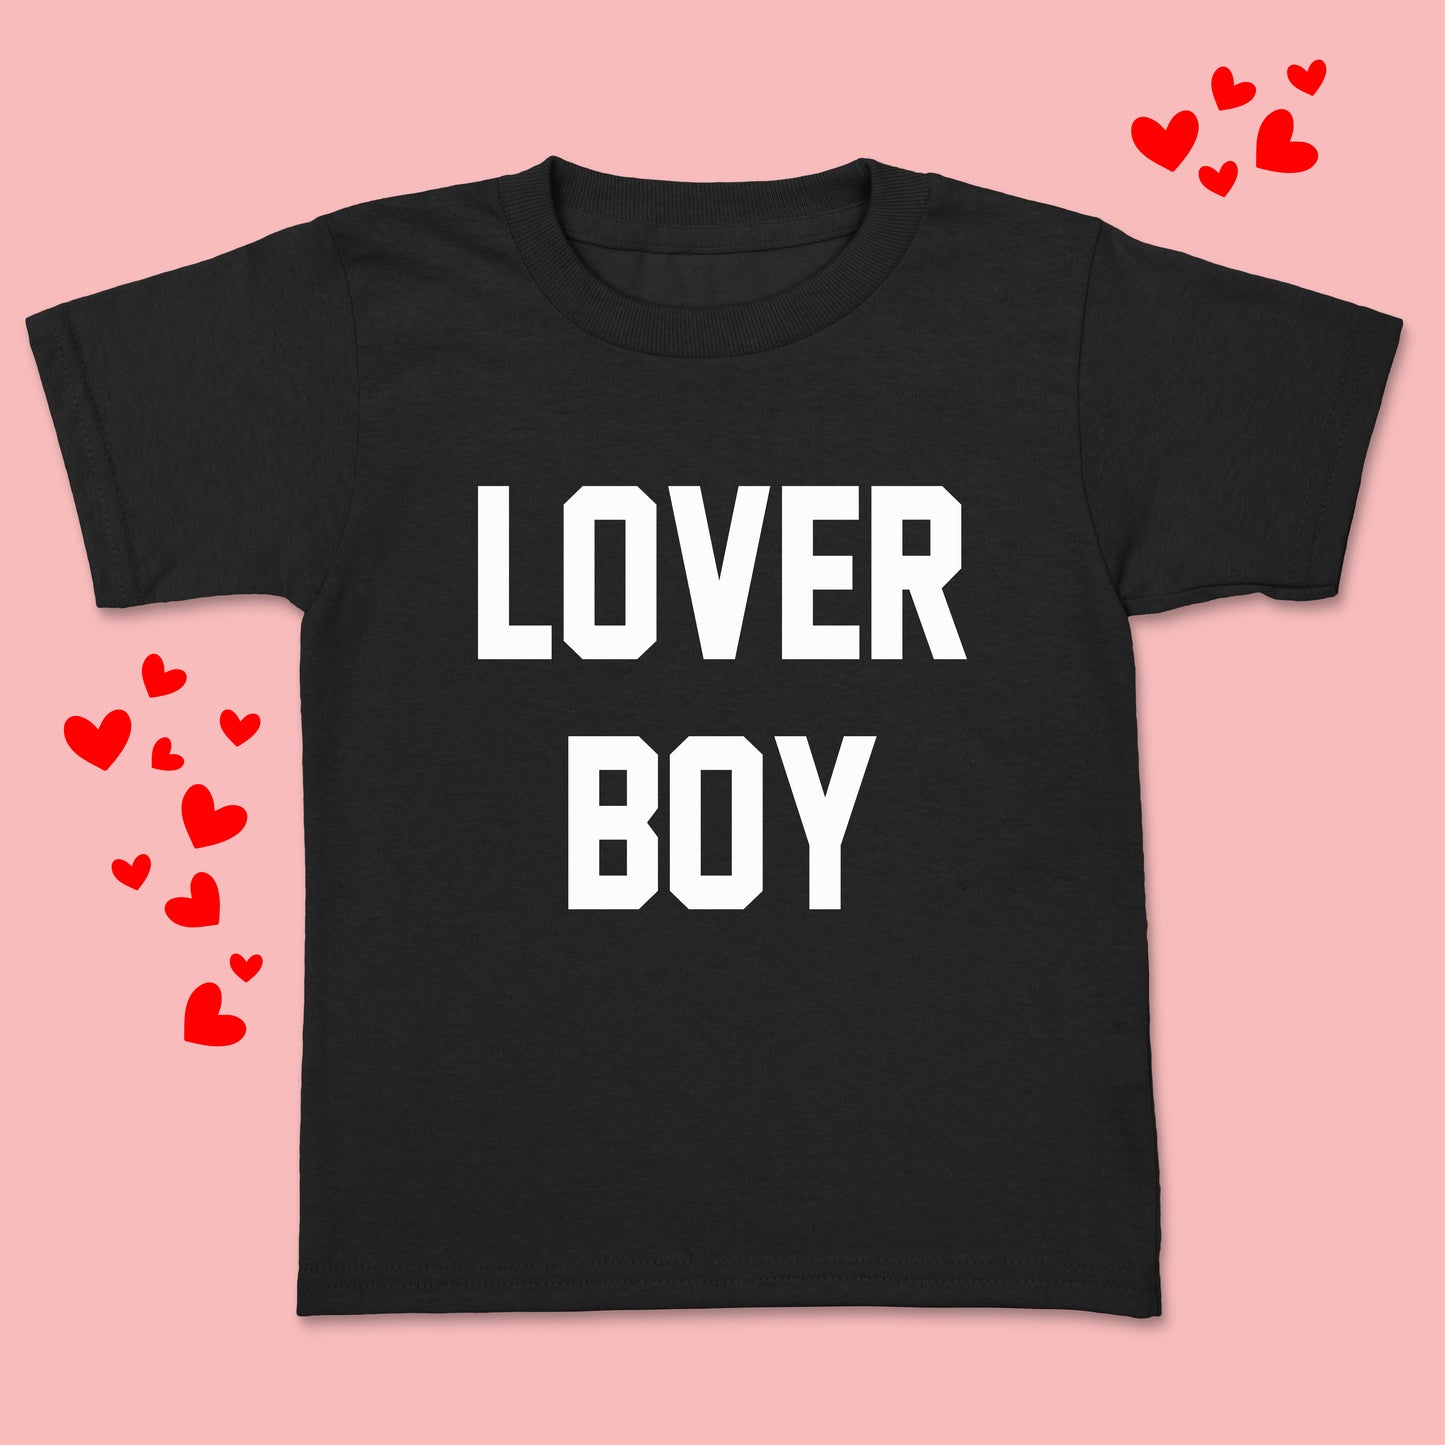 LOVER BOY YOUTH SHIRT <br> More colors available